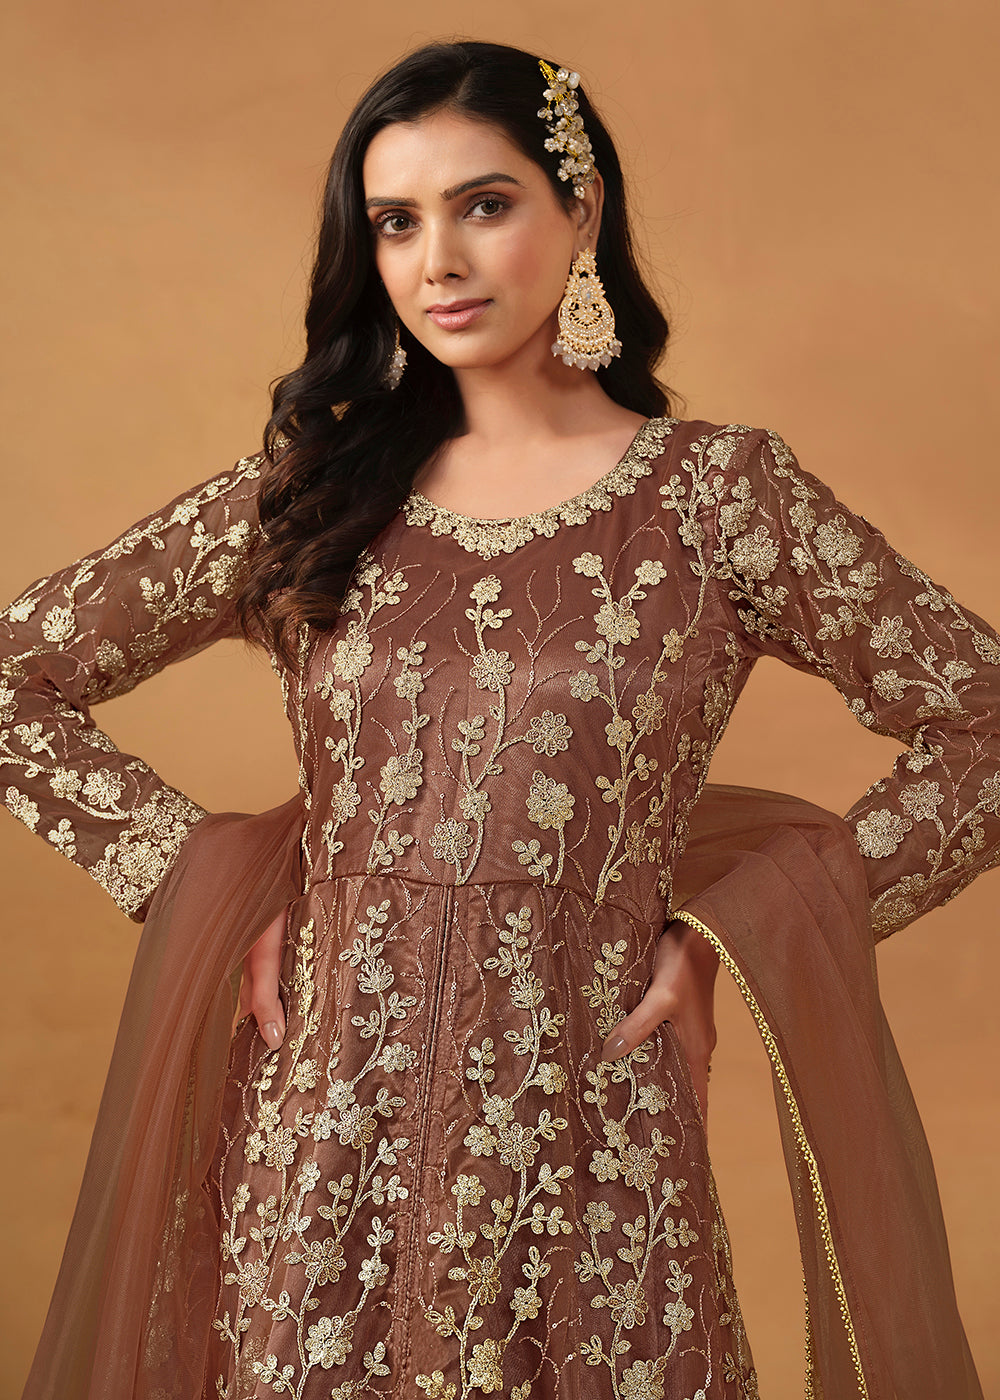 Buy Now Pant Style Snuff Brown Embroidered Net Wedding Anarkali Suit Online in USA, UK, Australia, New Zealand, Canada & Worldwide at Empress Clothing.